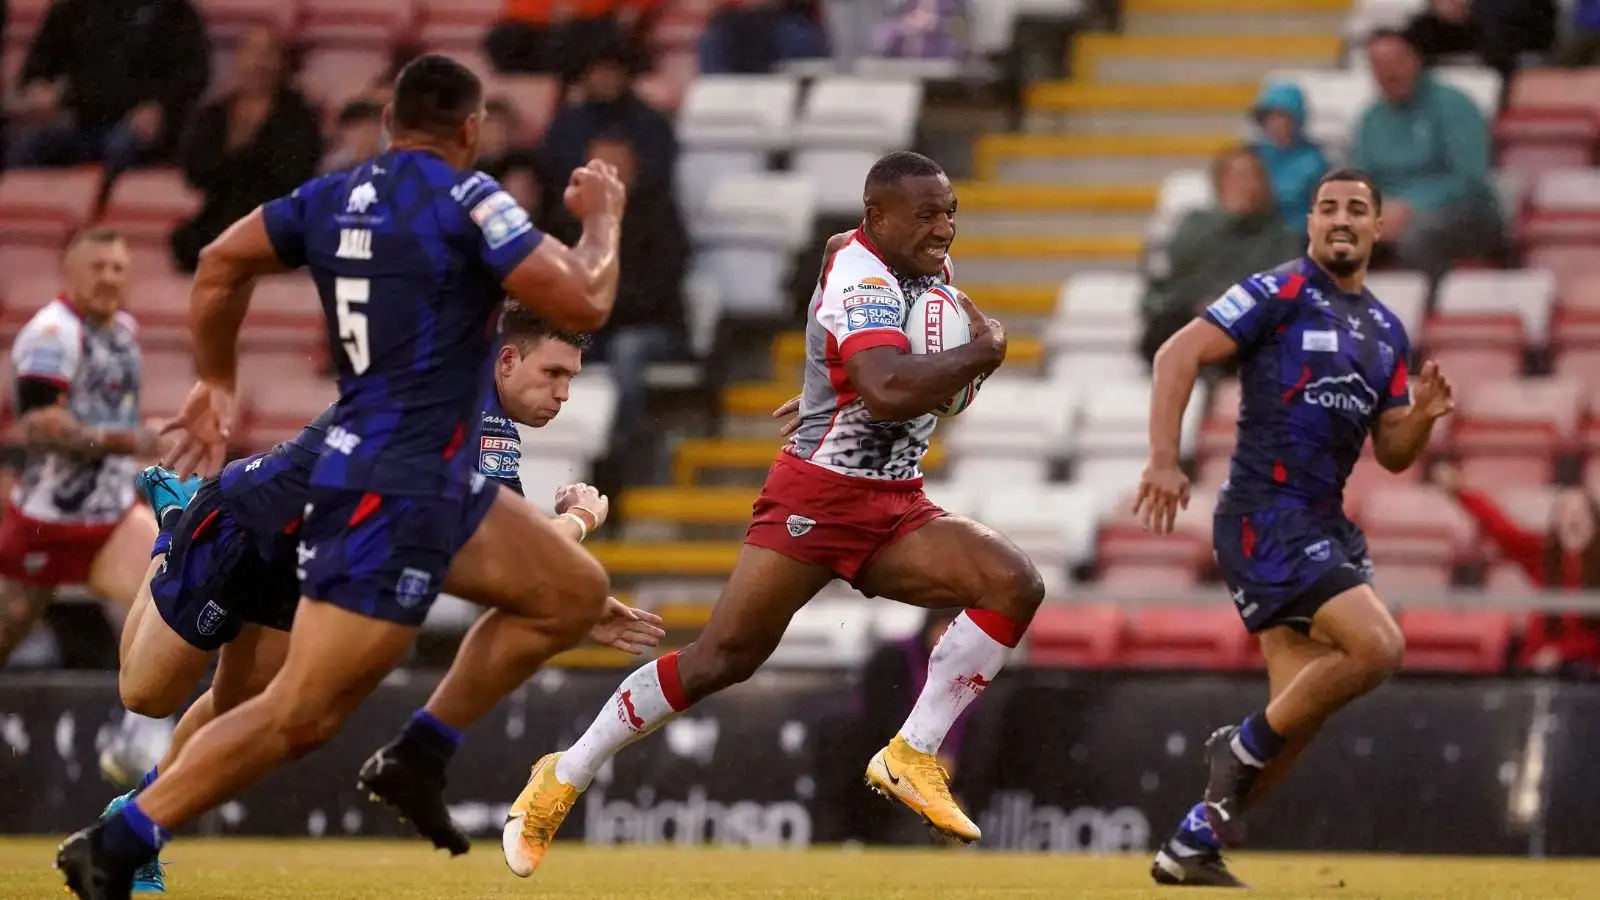 Edwin Ipape races away to score against Hull KR. Photo by PA Images / Alamy Stock Photo.